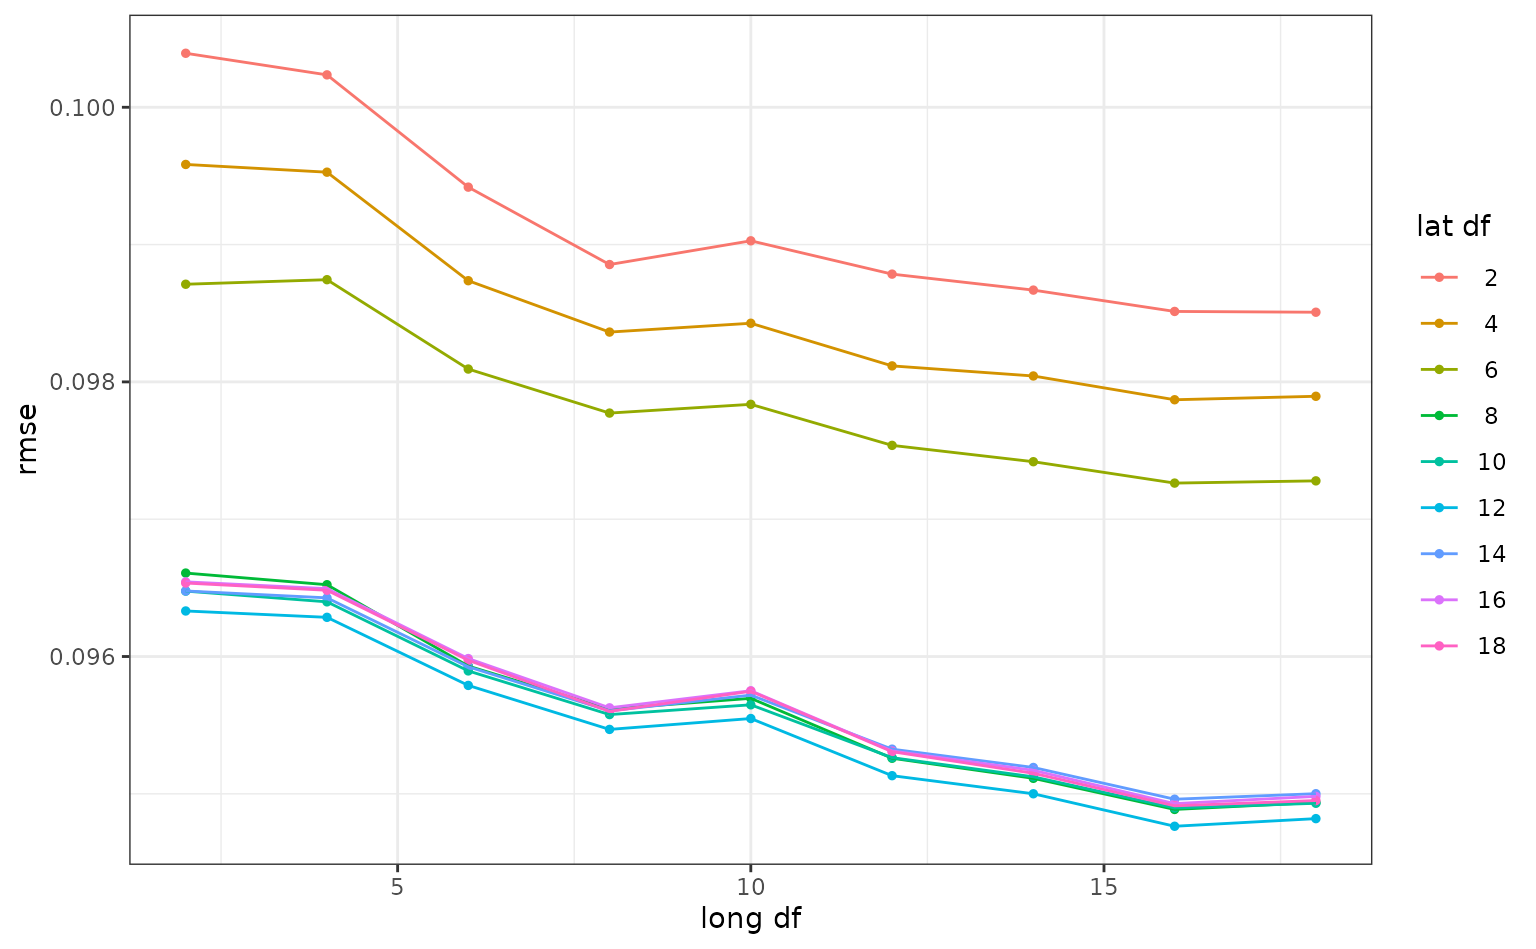 A ggplot2 line plot. The x axis plots the degrees of freedom alotted to the spline parameter mapped to the longitude, and ranges from 0 to 17. The y axis plots the root mean squared error. Lines are colored by the spline terms for the latitude. Generally, from left to right, each line follows a downward trend, and lines from higher latitude degrees of freedom and centered lower.